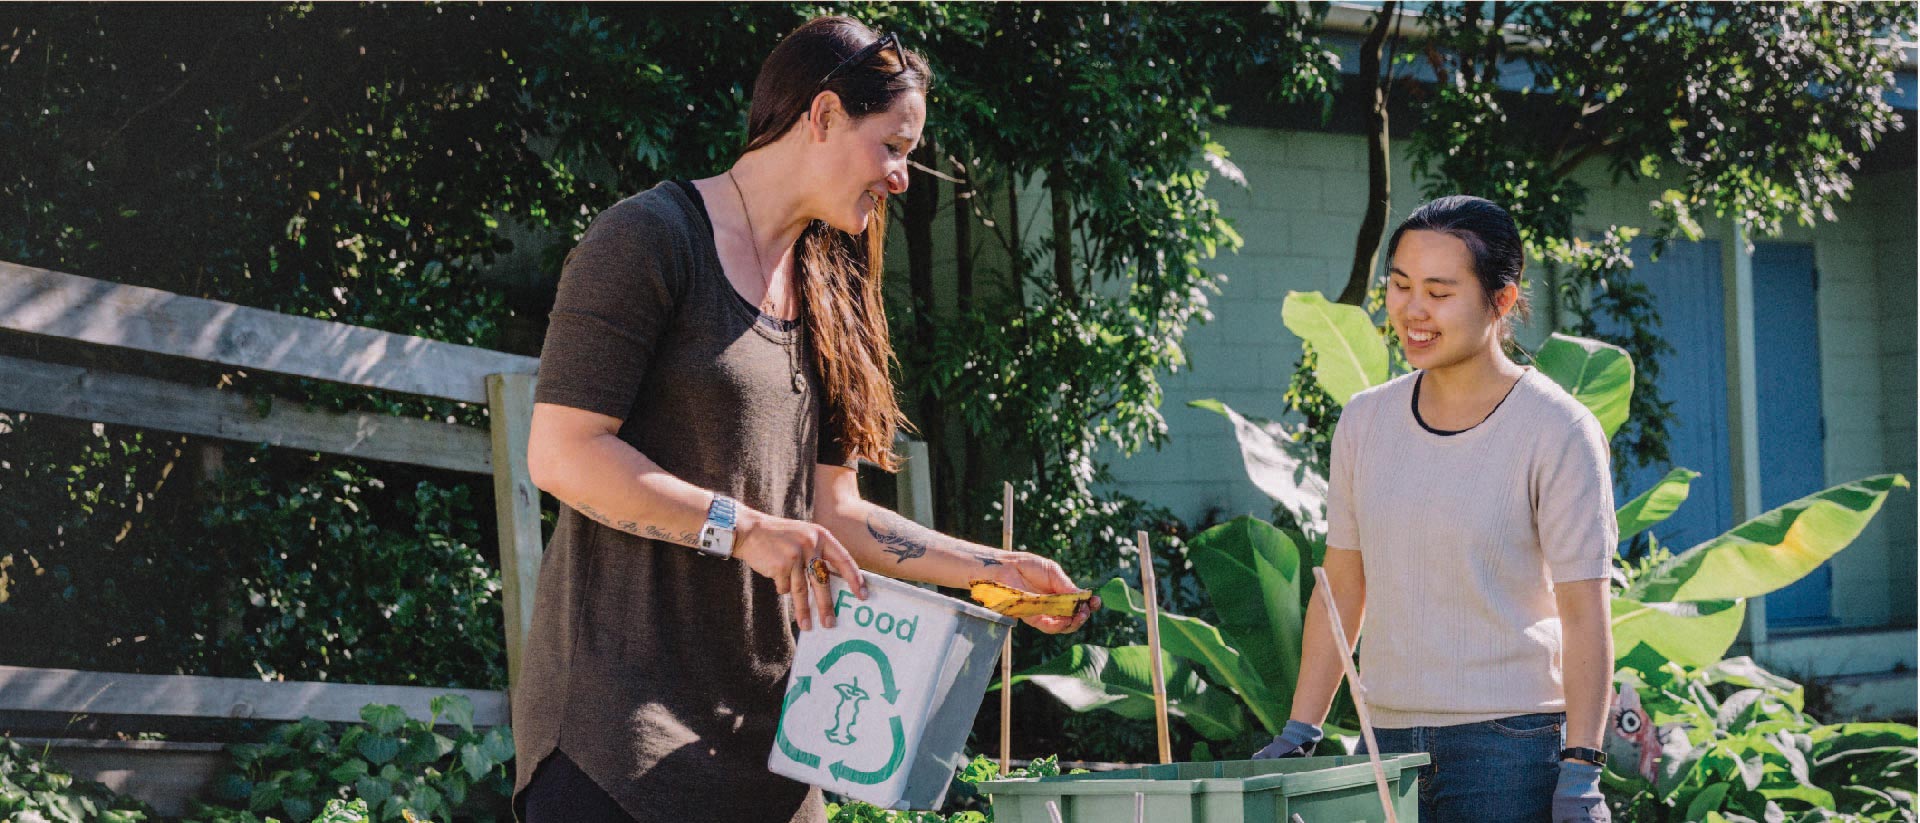 Two people in a community garden adding food scraps to a worm farm